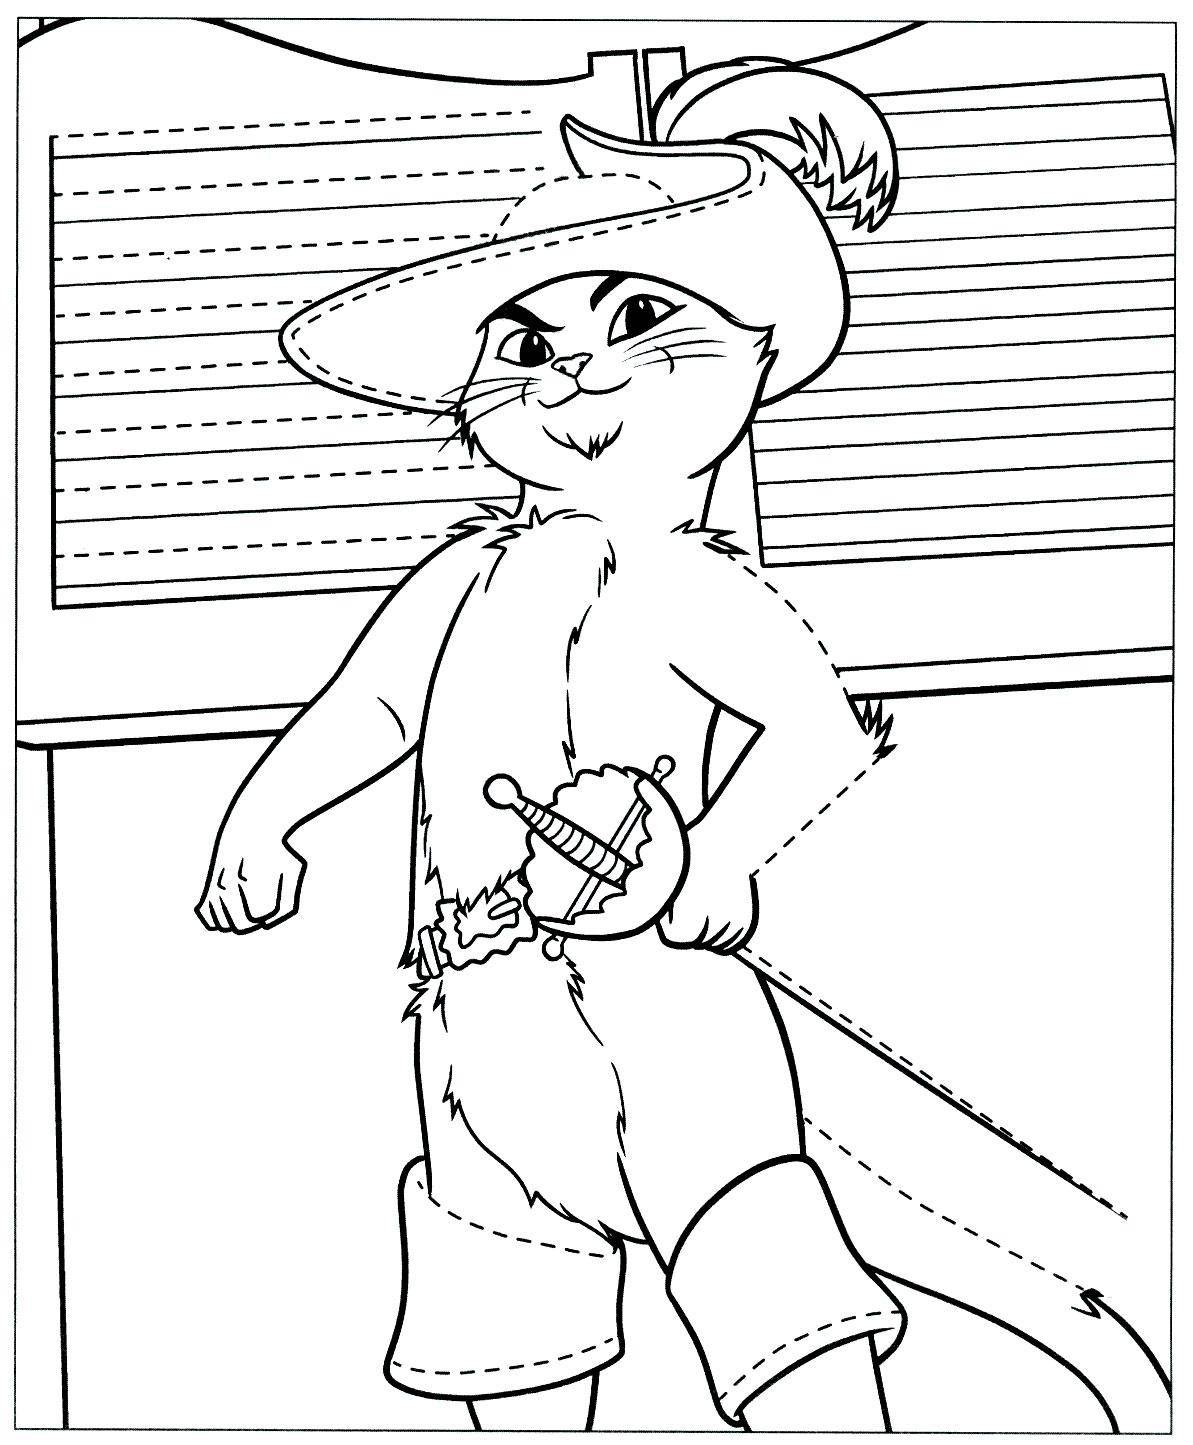 Coloring Picture puss in boots with sword. Category Pets allowed. Tags:  cat, cat.